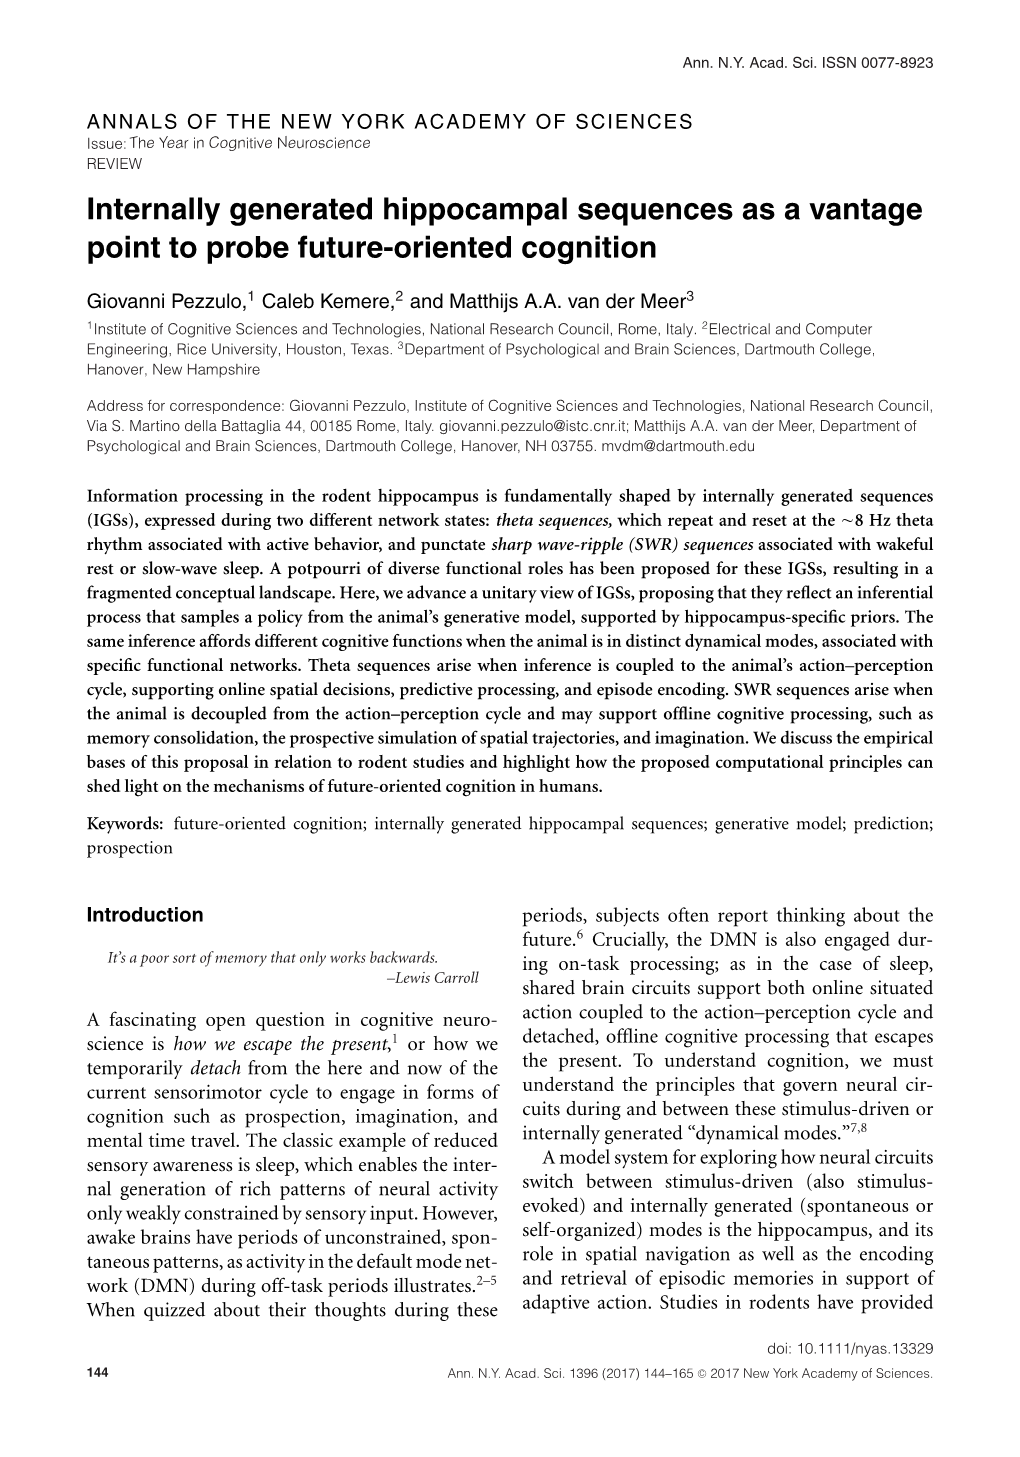 Internally Generated Hippocampal Sequences As a Vantage Point to Probe Future-Oriented Cognition